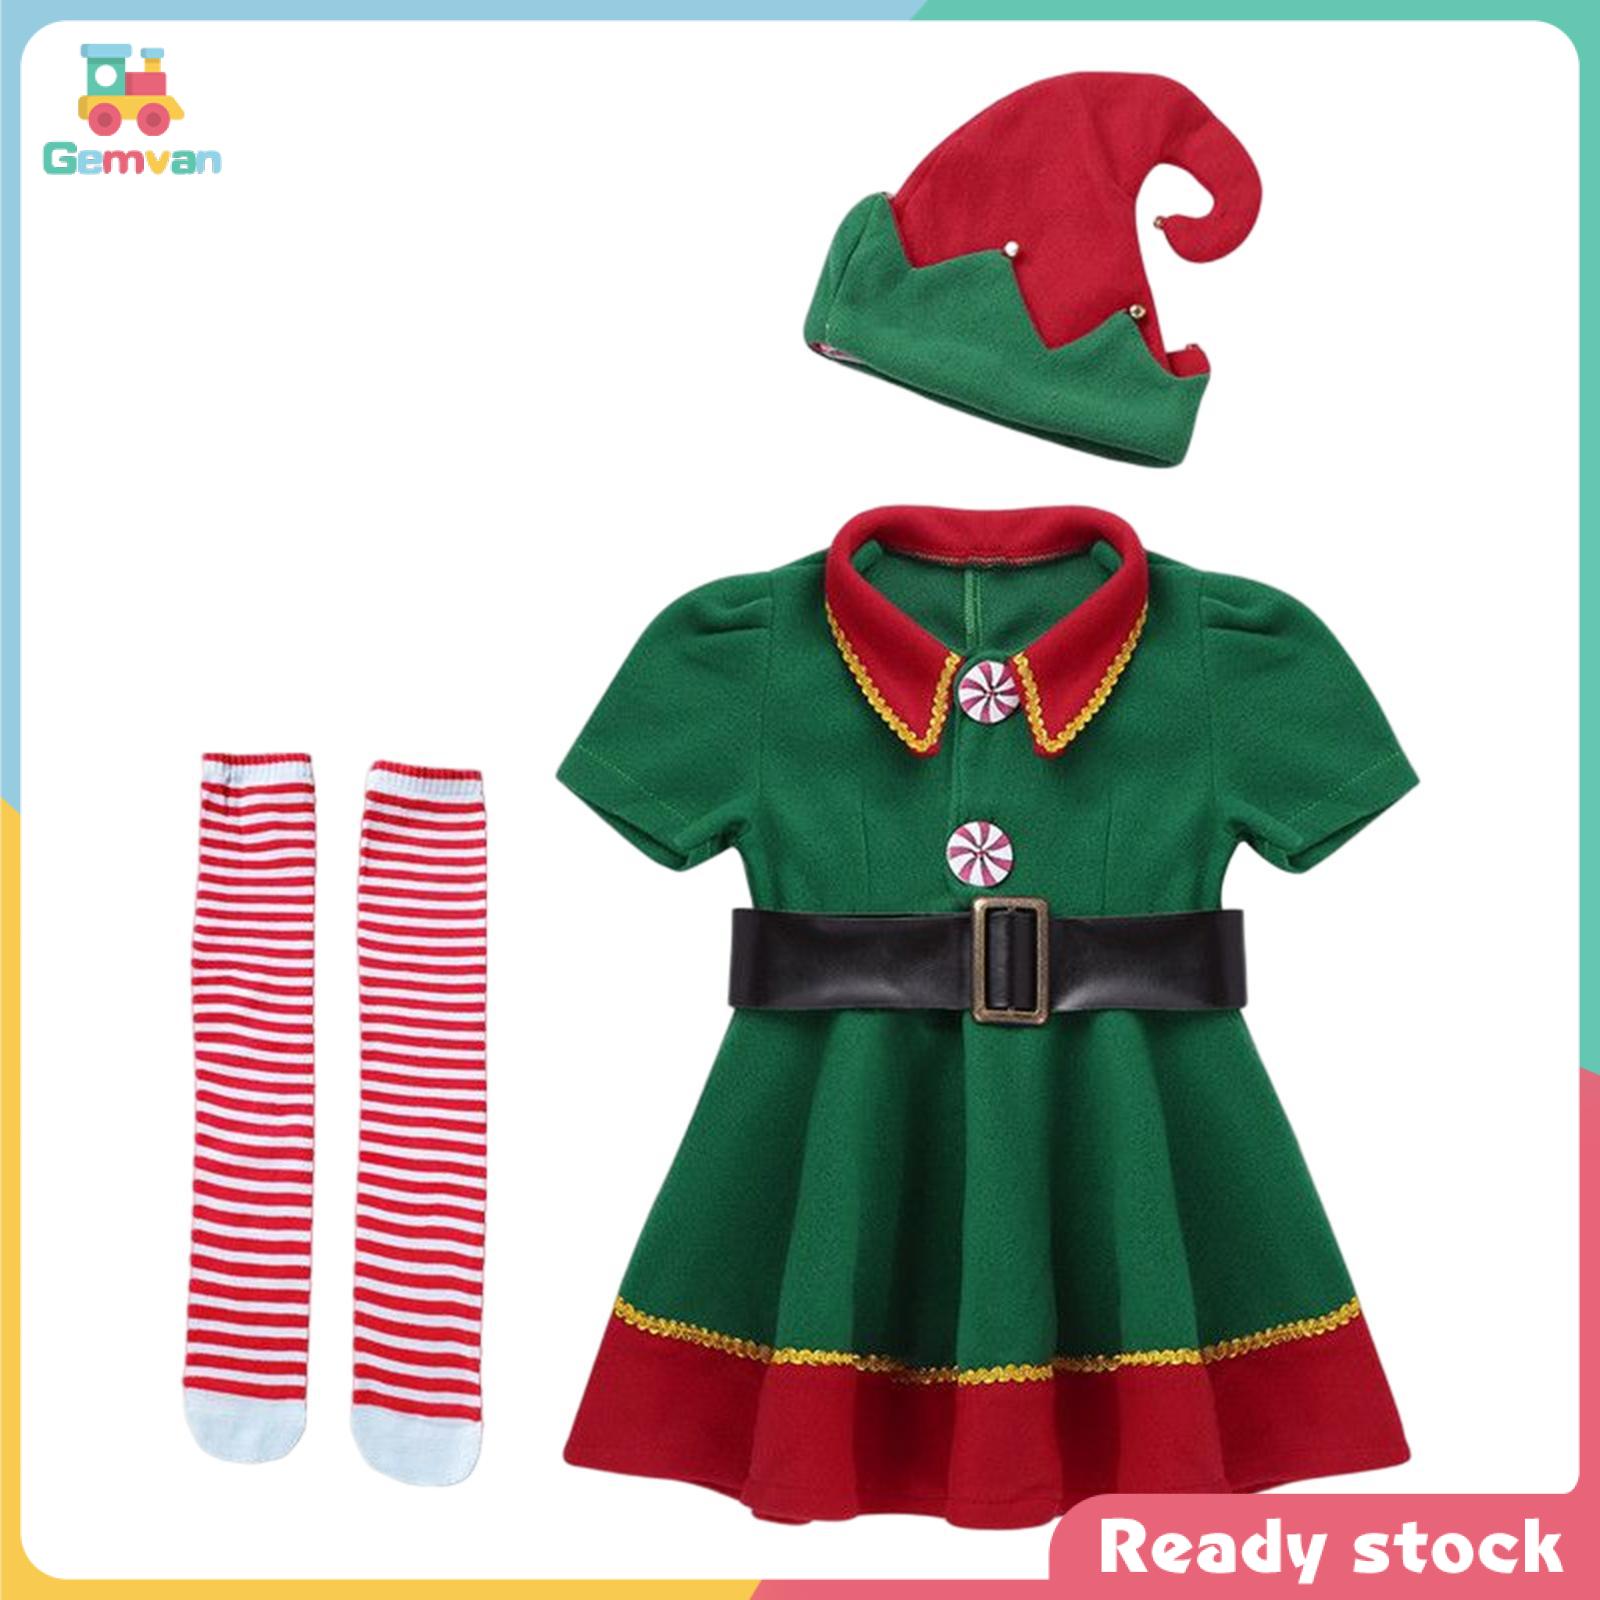 Gemvan Elf Christmas Costume Clothes Photo Props Cosplay for Party